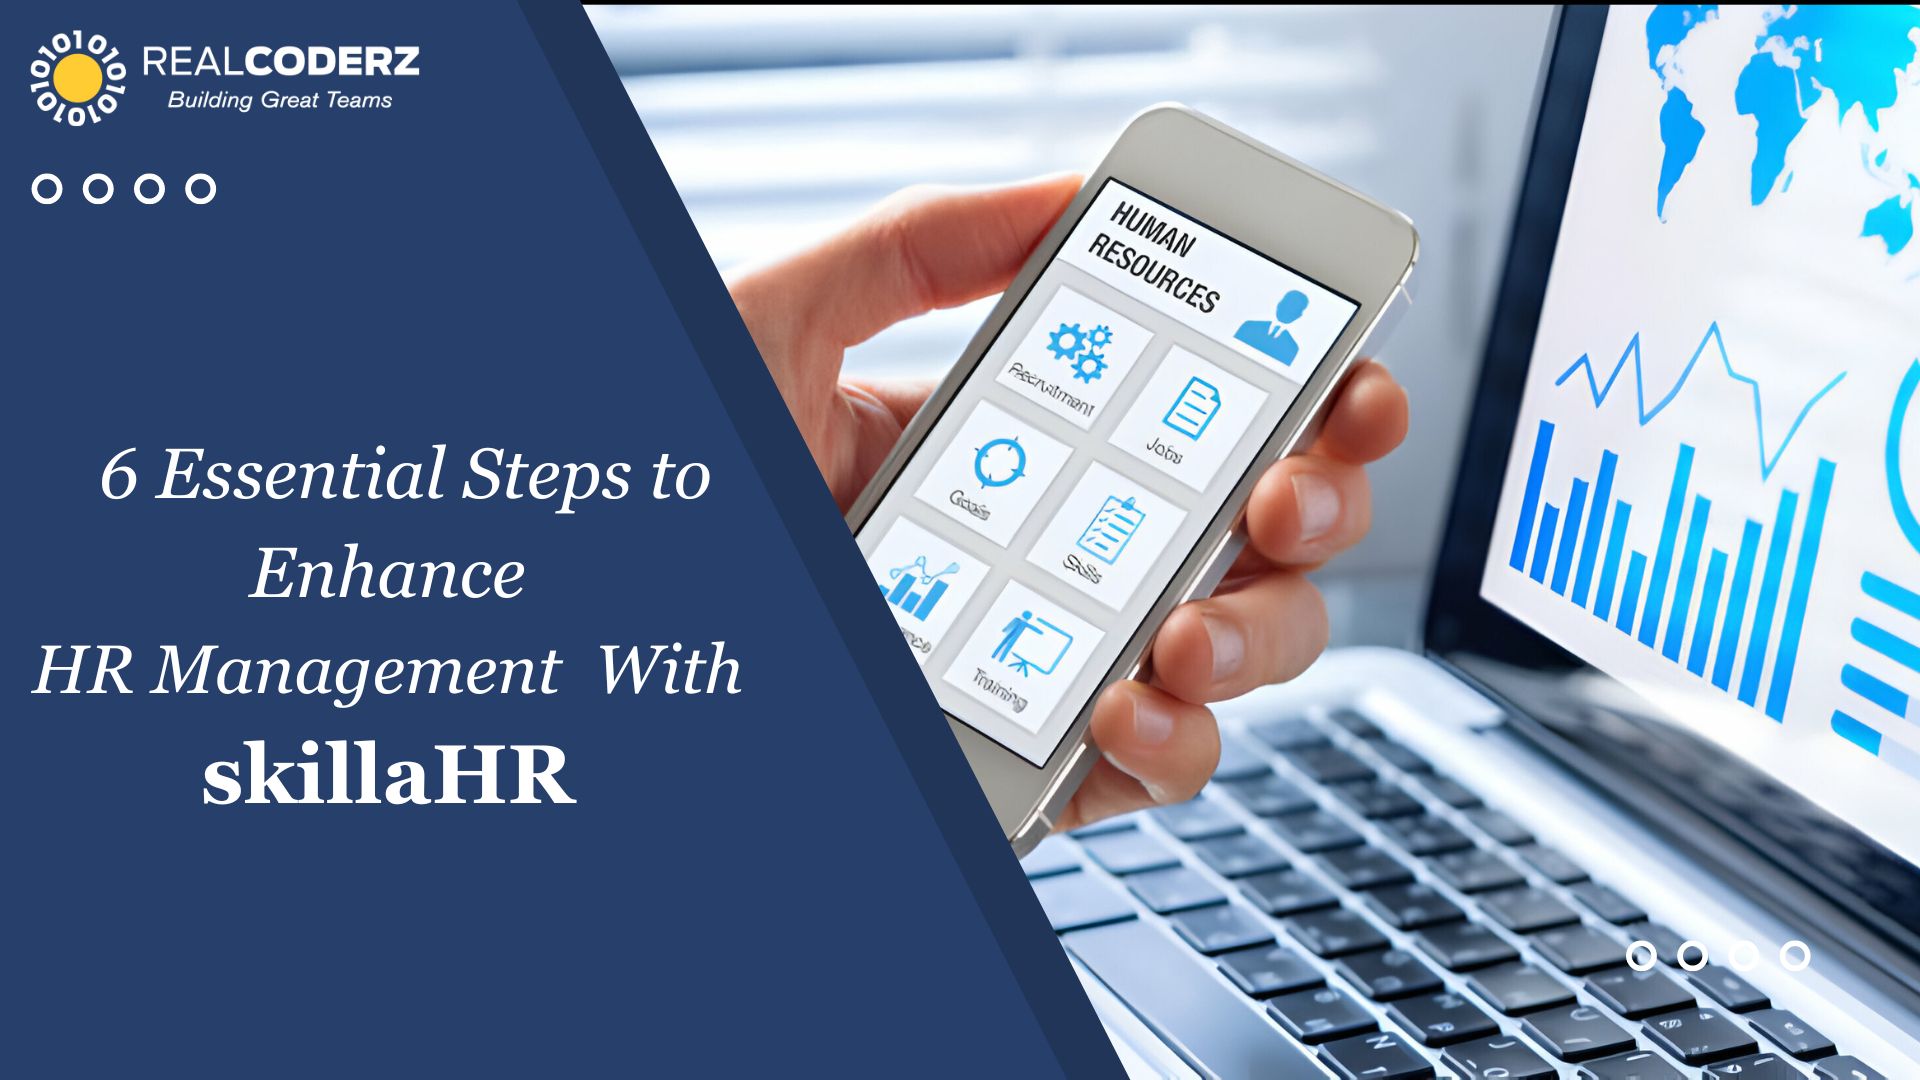 6 Essential Steps to Enhance HR Management with skillaHR